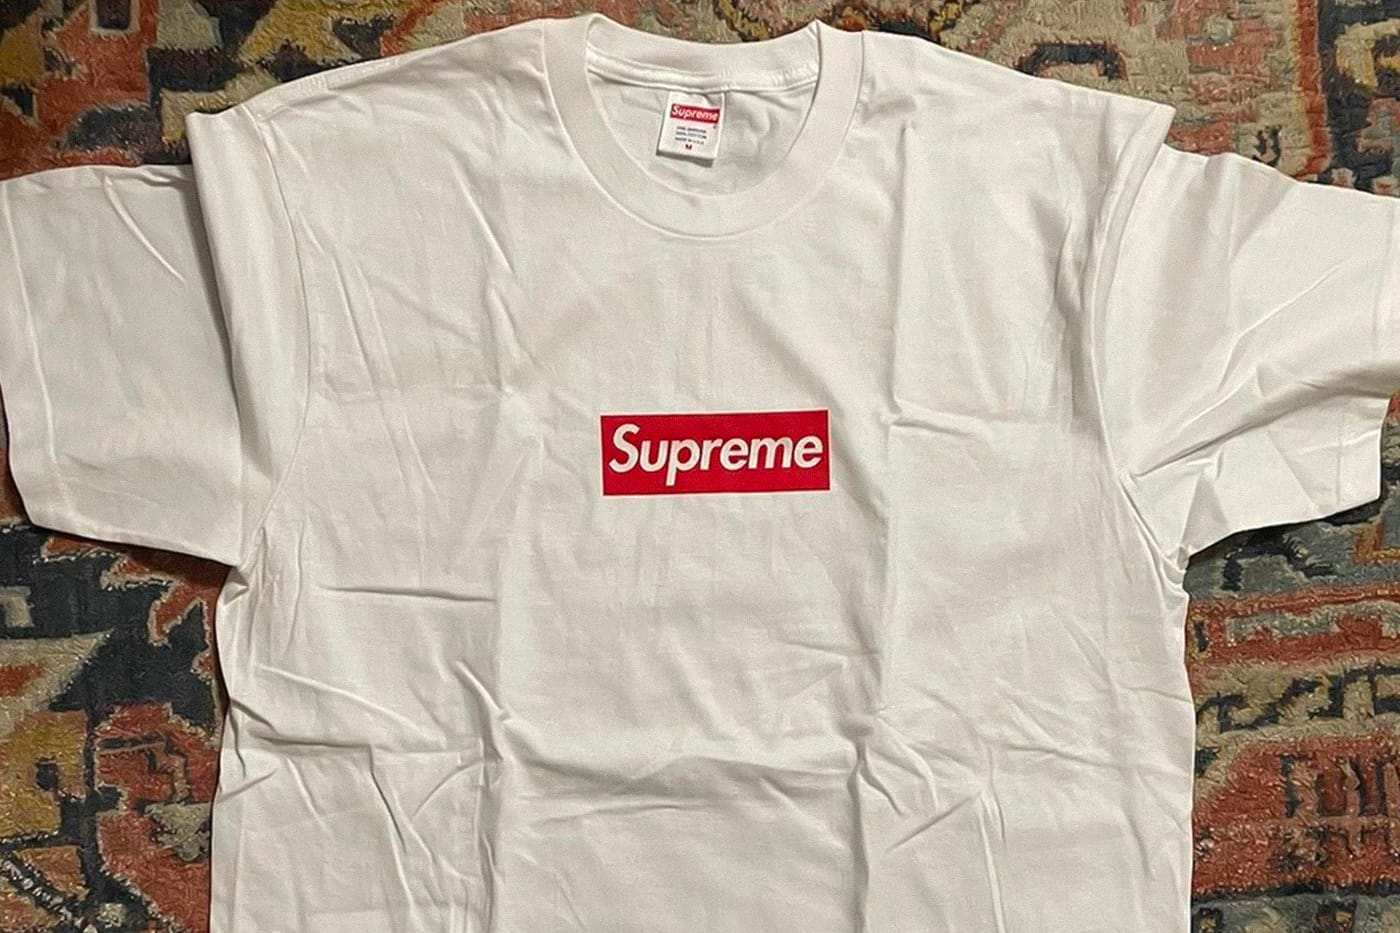 Supreme West Hollywood Opening LA Box Logo Tee First Look   Hypebeast